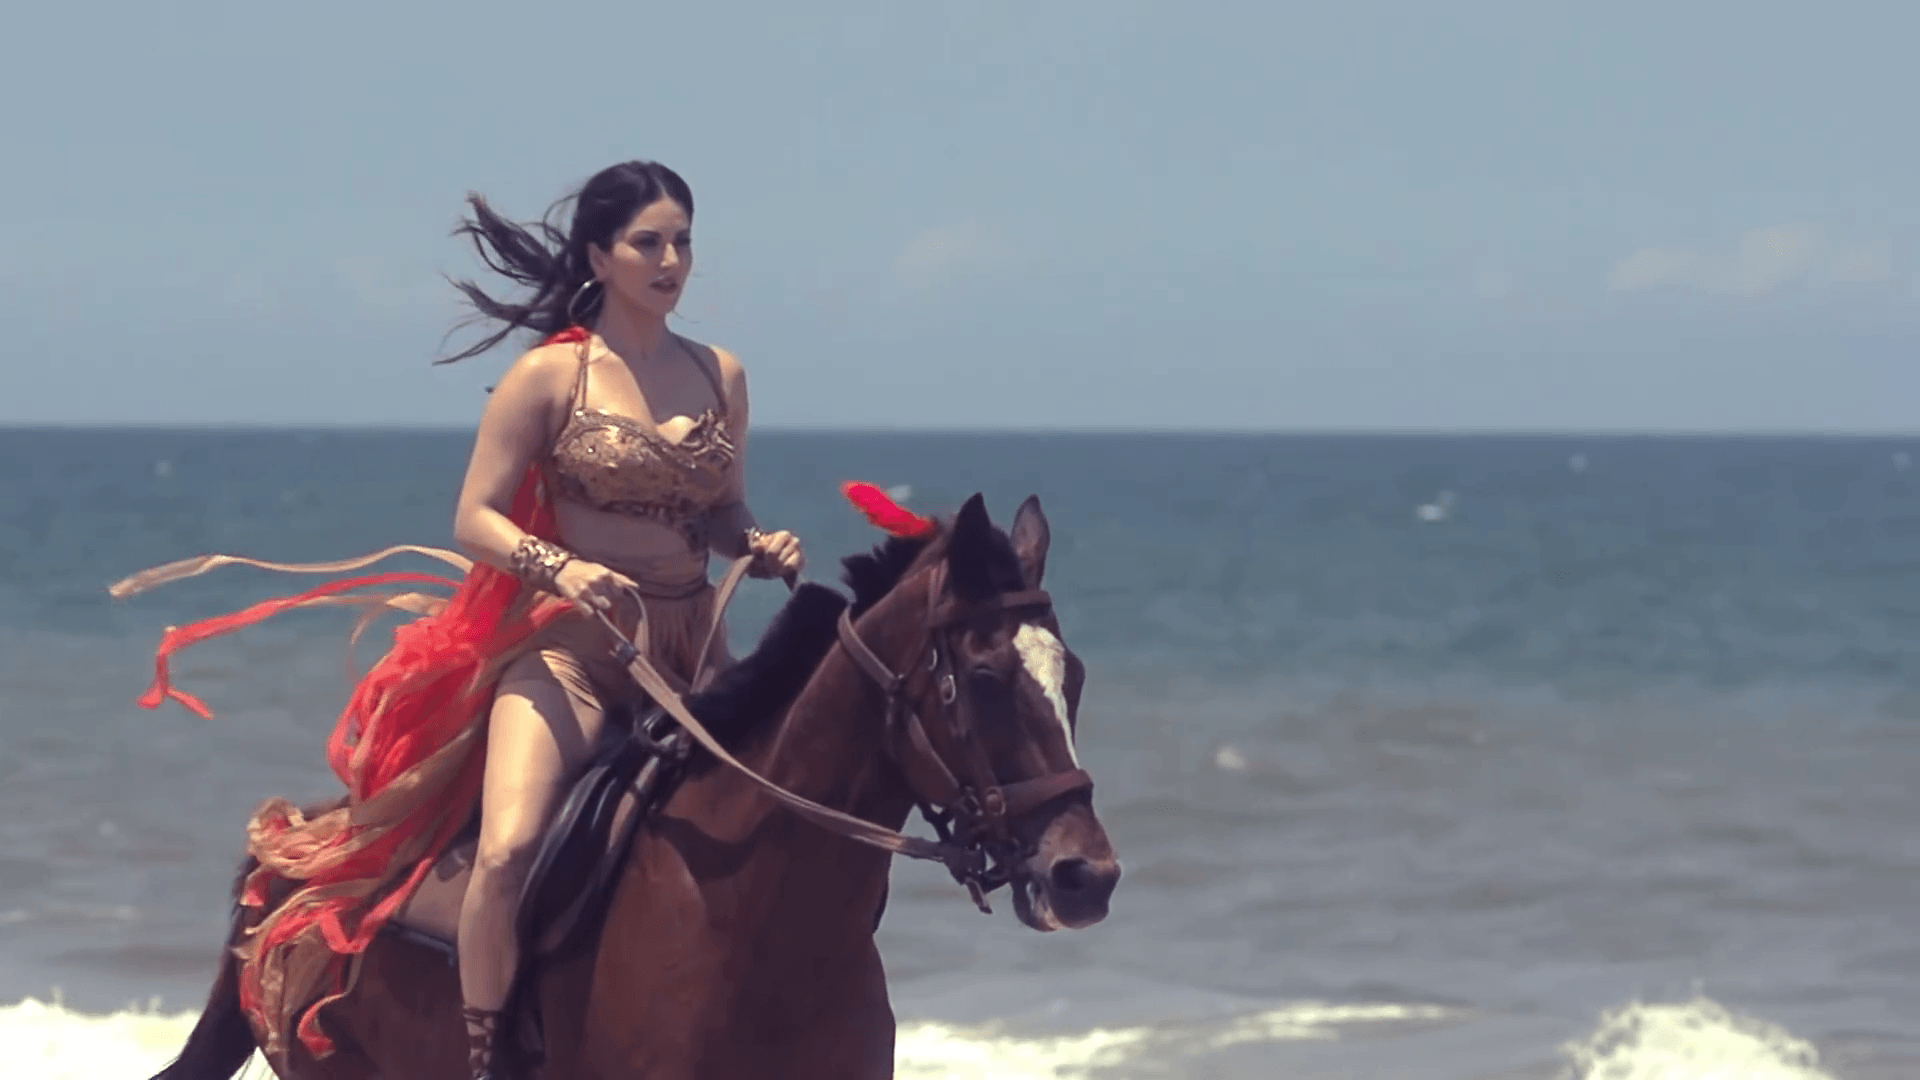 Sunny Leone Horse Riding at Beach Wallpapers.